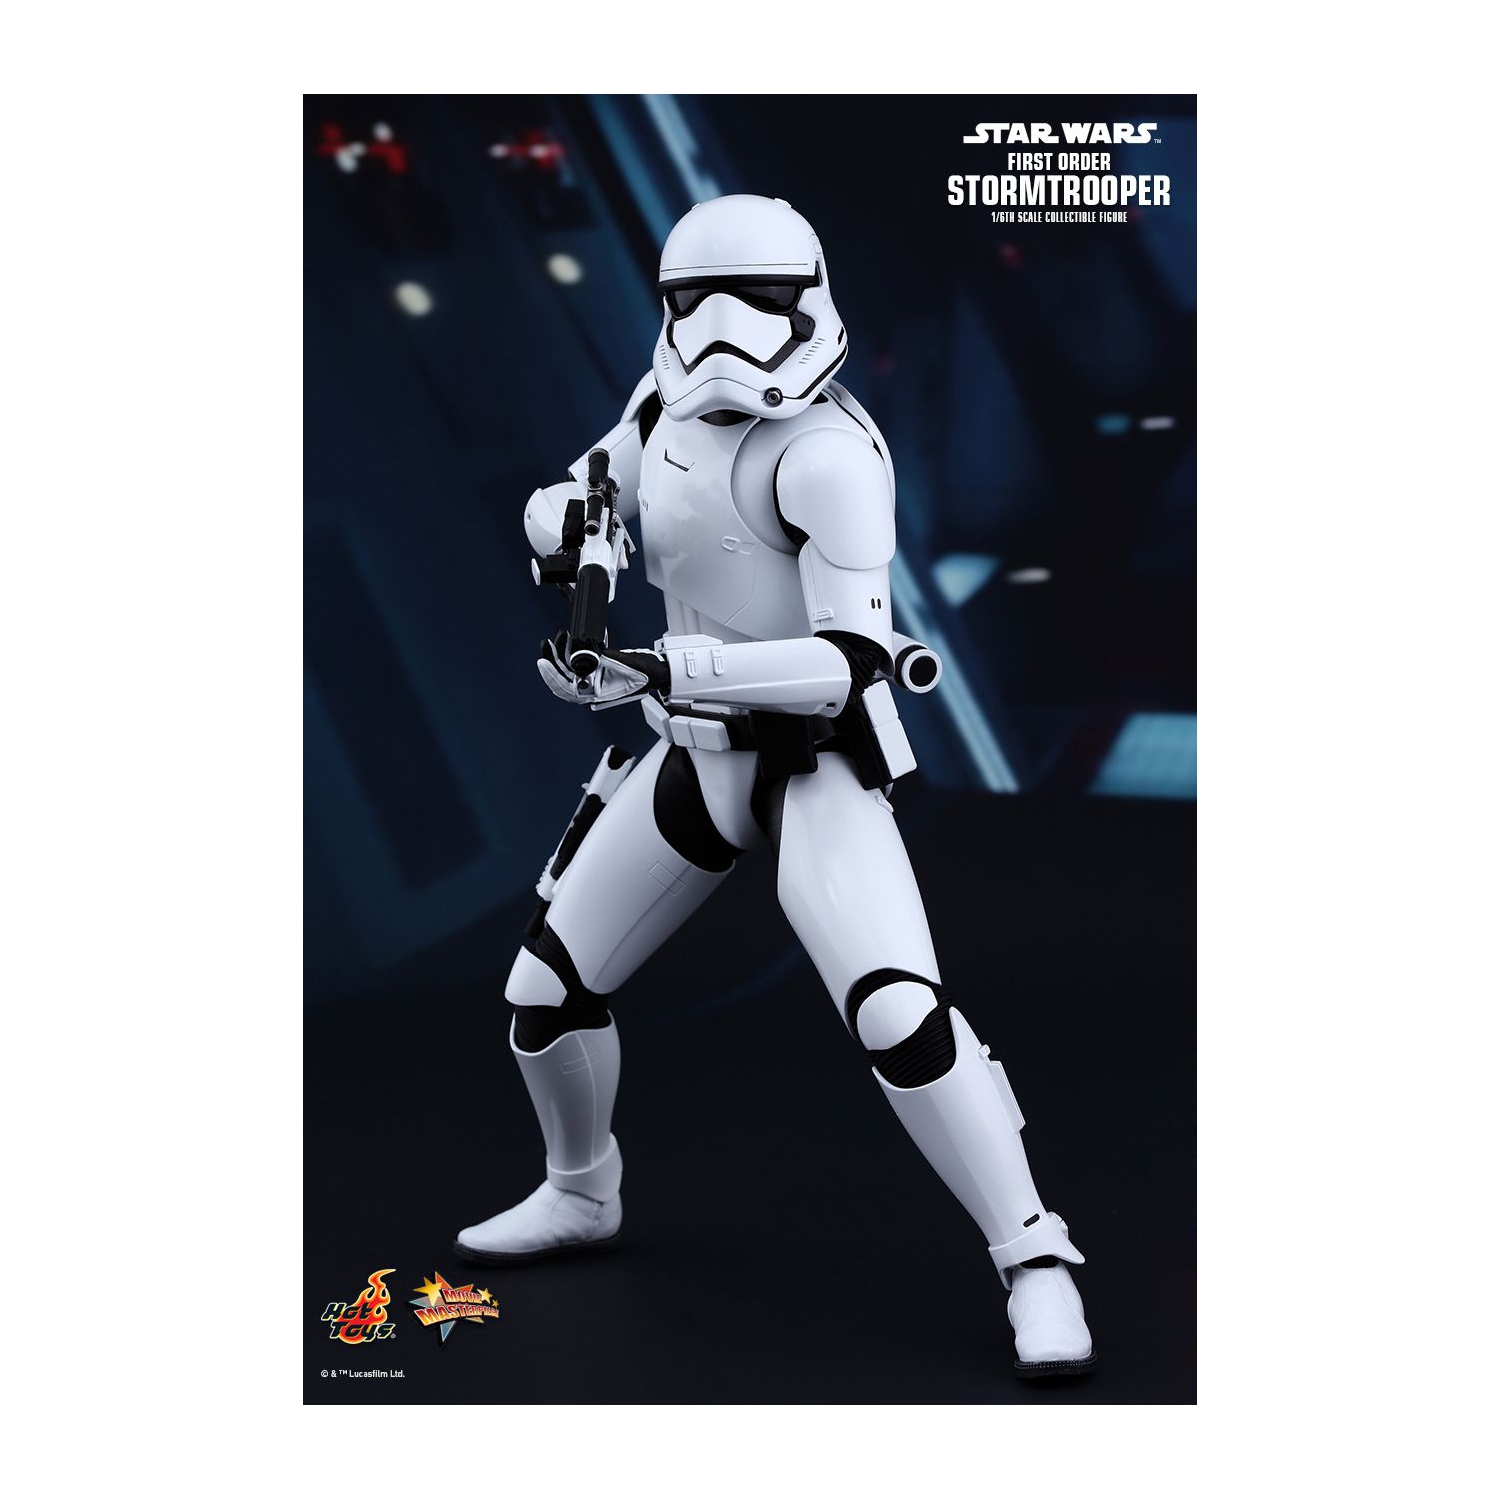 Star Wars The Force Awakens 12 Inch Action Figure Movie Masterpiece 1/6 Scale Series - First Order Stormtrooper Hot Toys